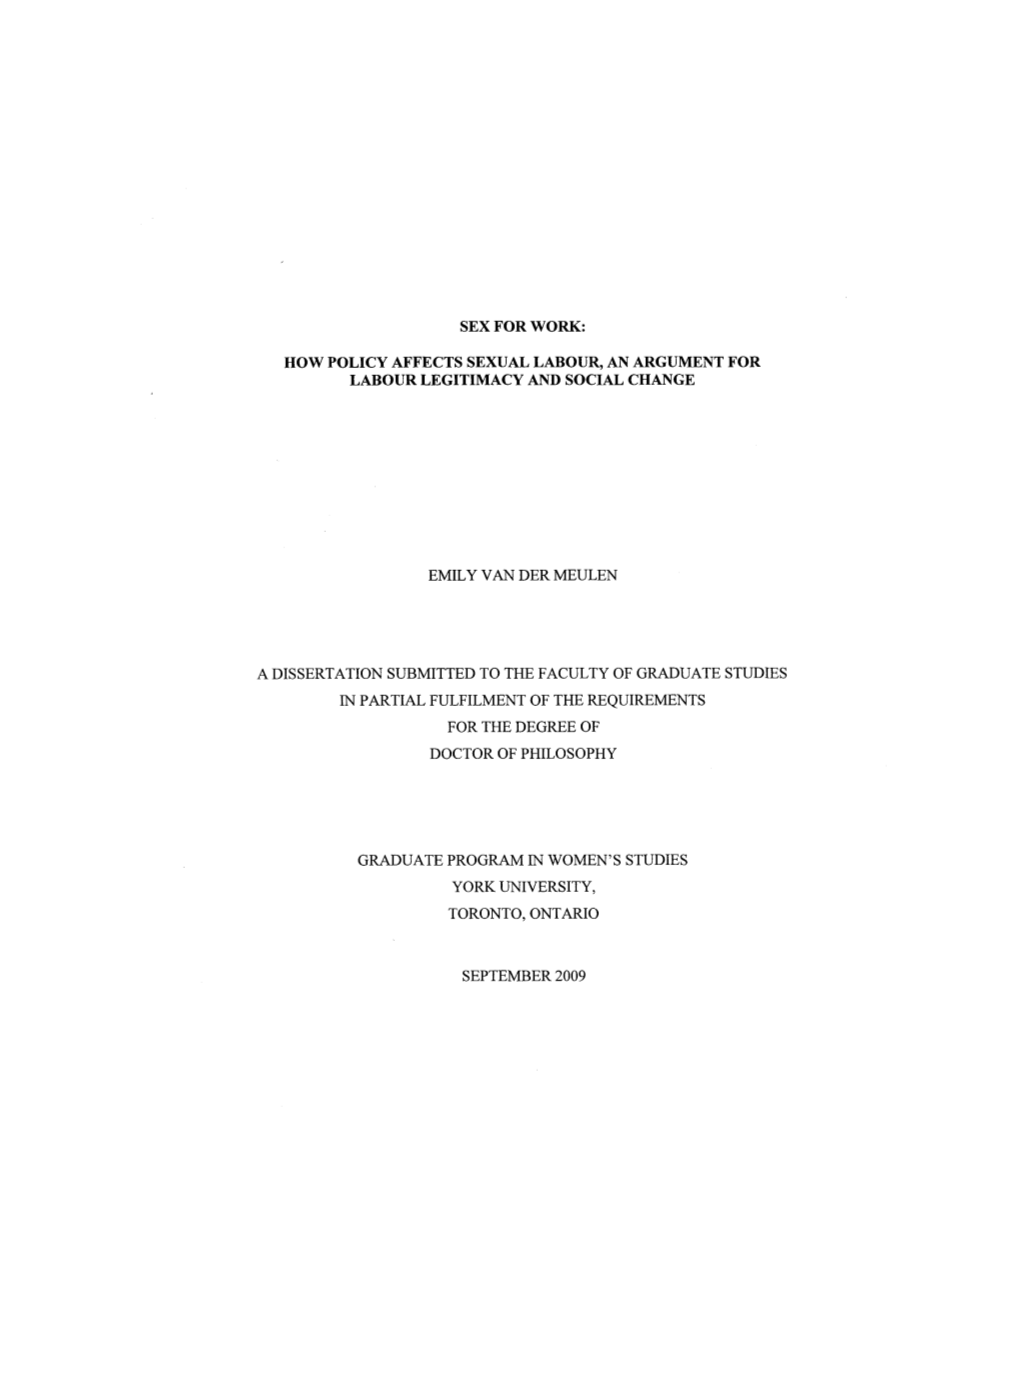 A Dissertation Submitted to the Faculty of Graduate Studies in Partial Fulfilment of the Requirements for the Degree of Doctor of Philosophy